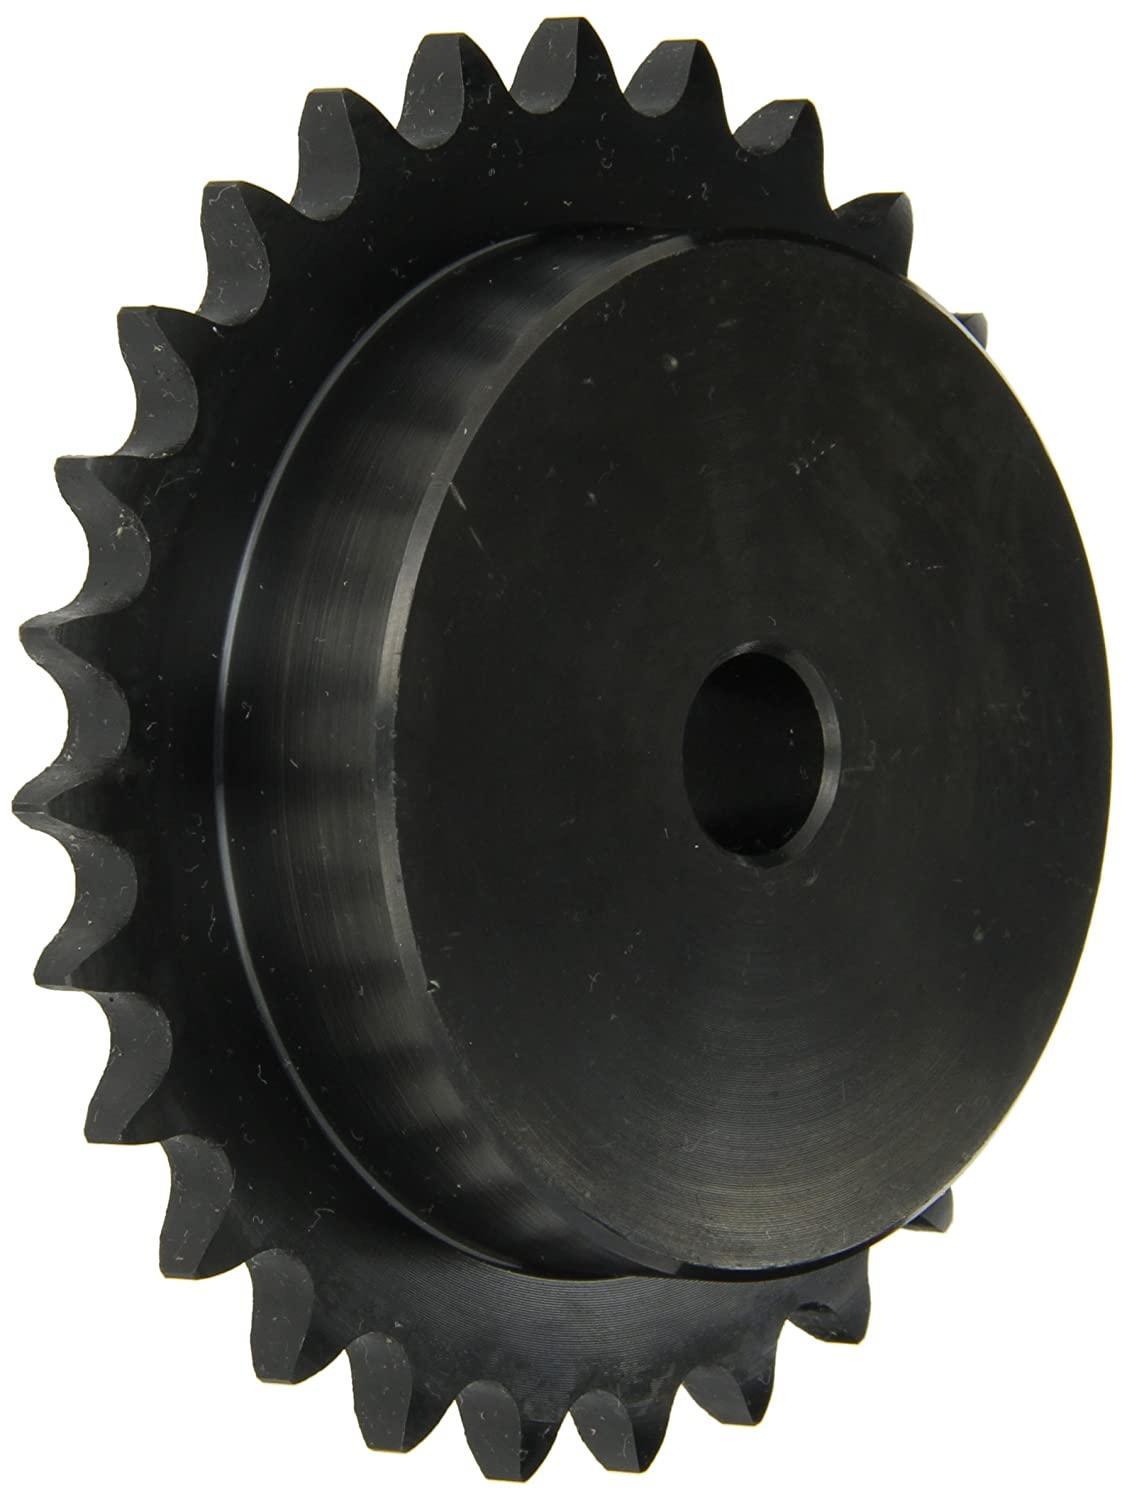 25B16 Roller Chain Sprocket With Stock Bore - Forces Inc